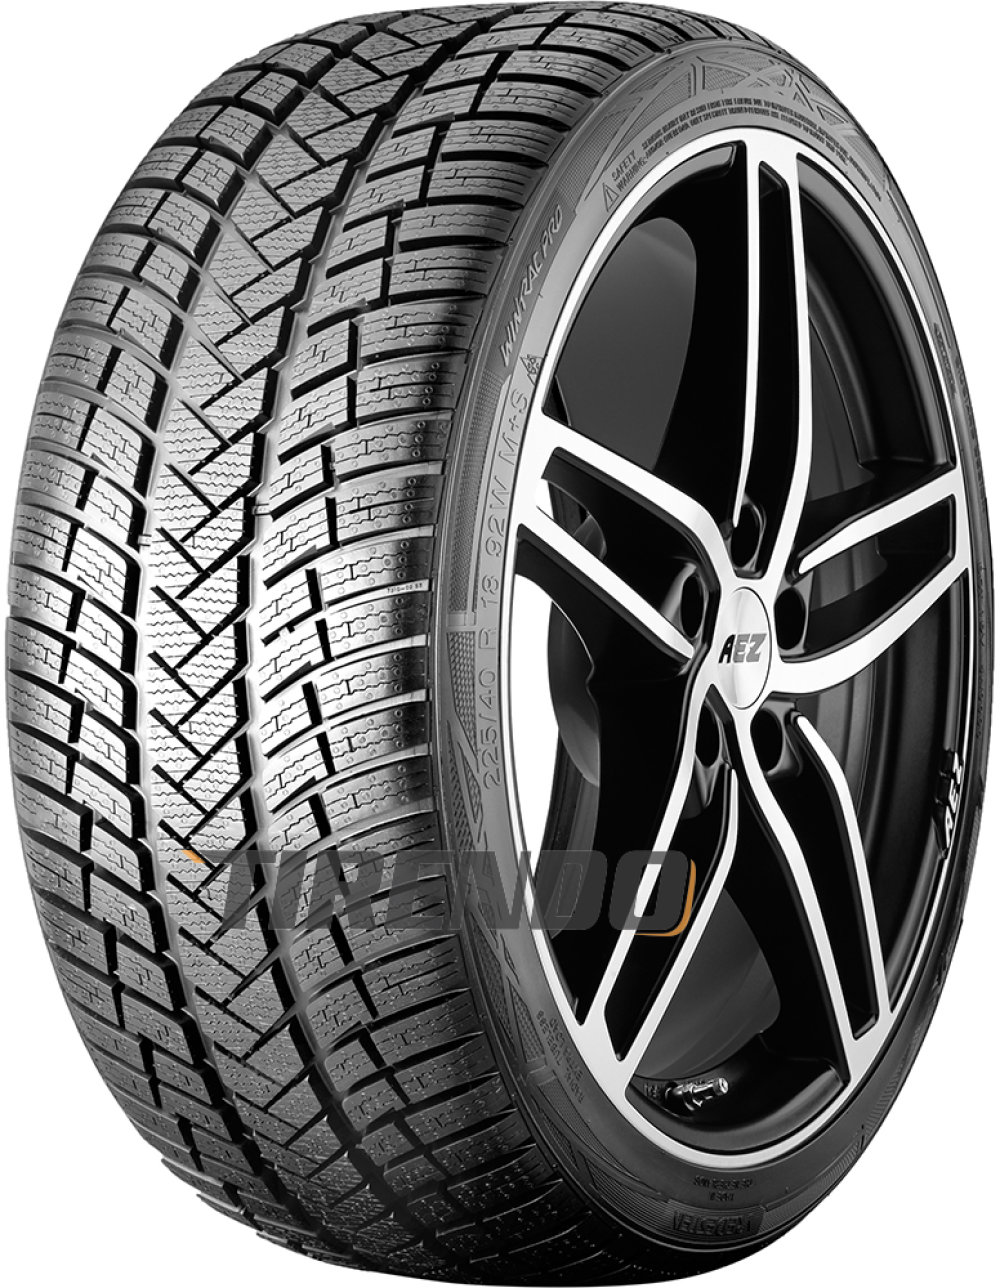 Image of Vredestein Wintrac Pro ( 255/55 R19 111V XL )